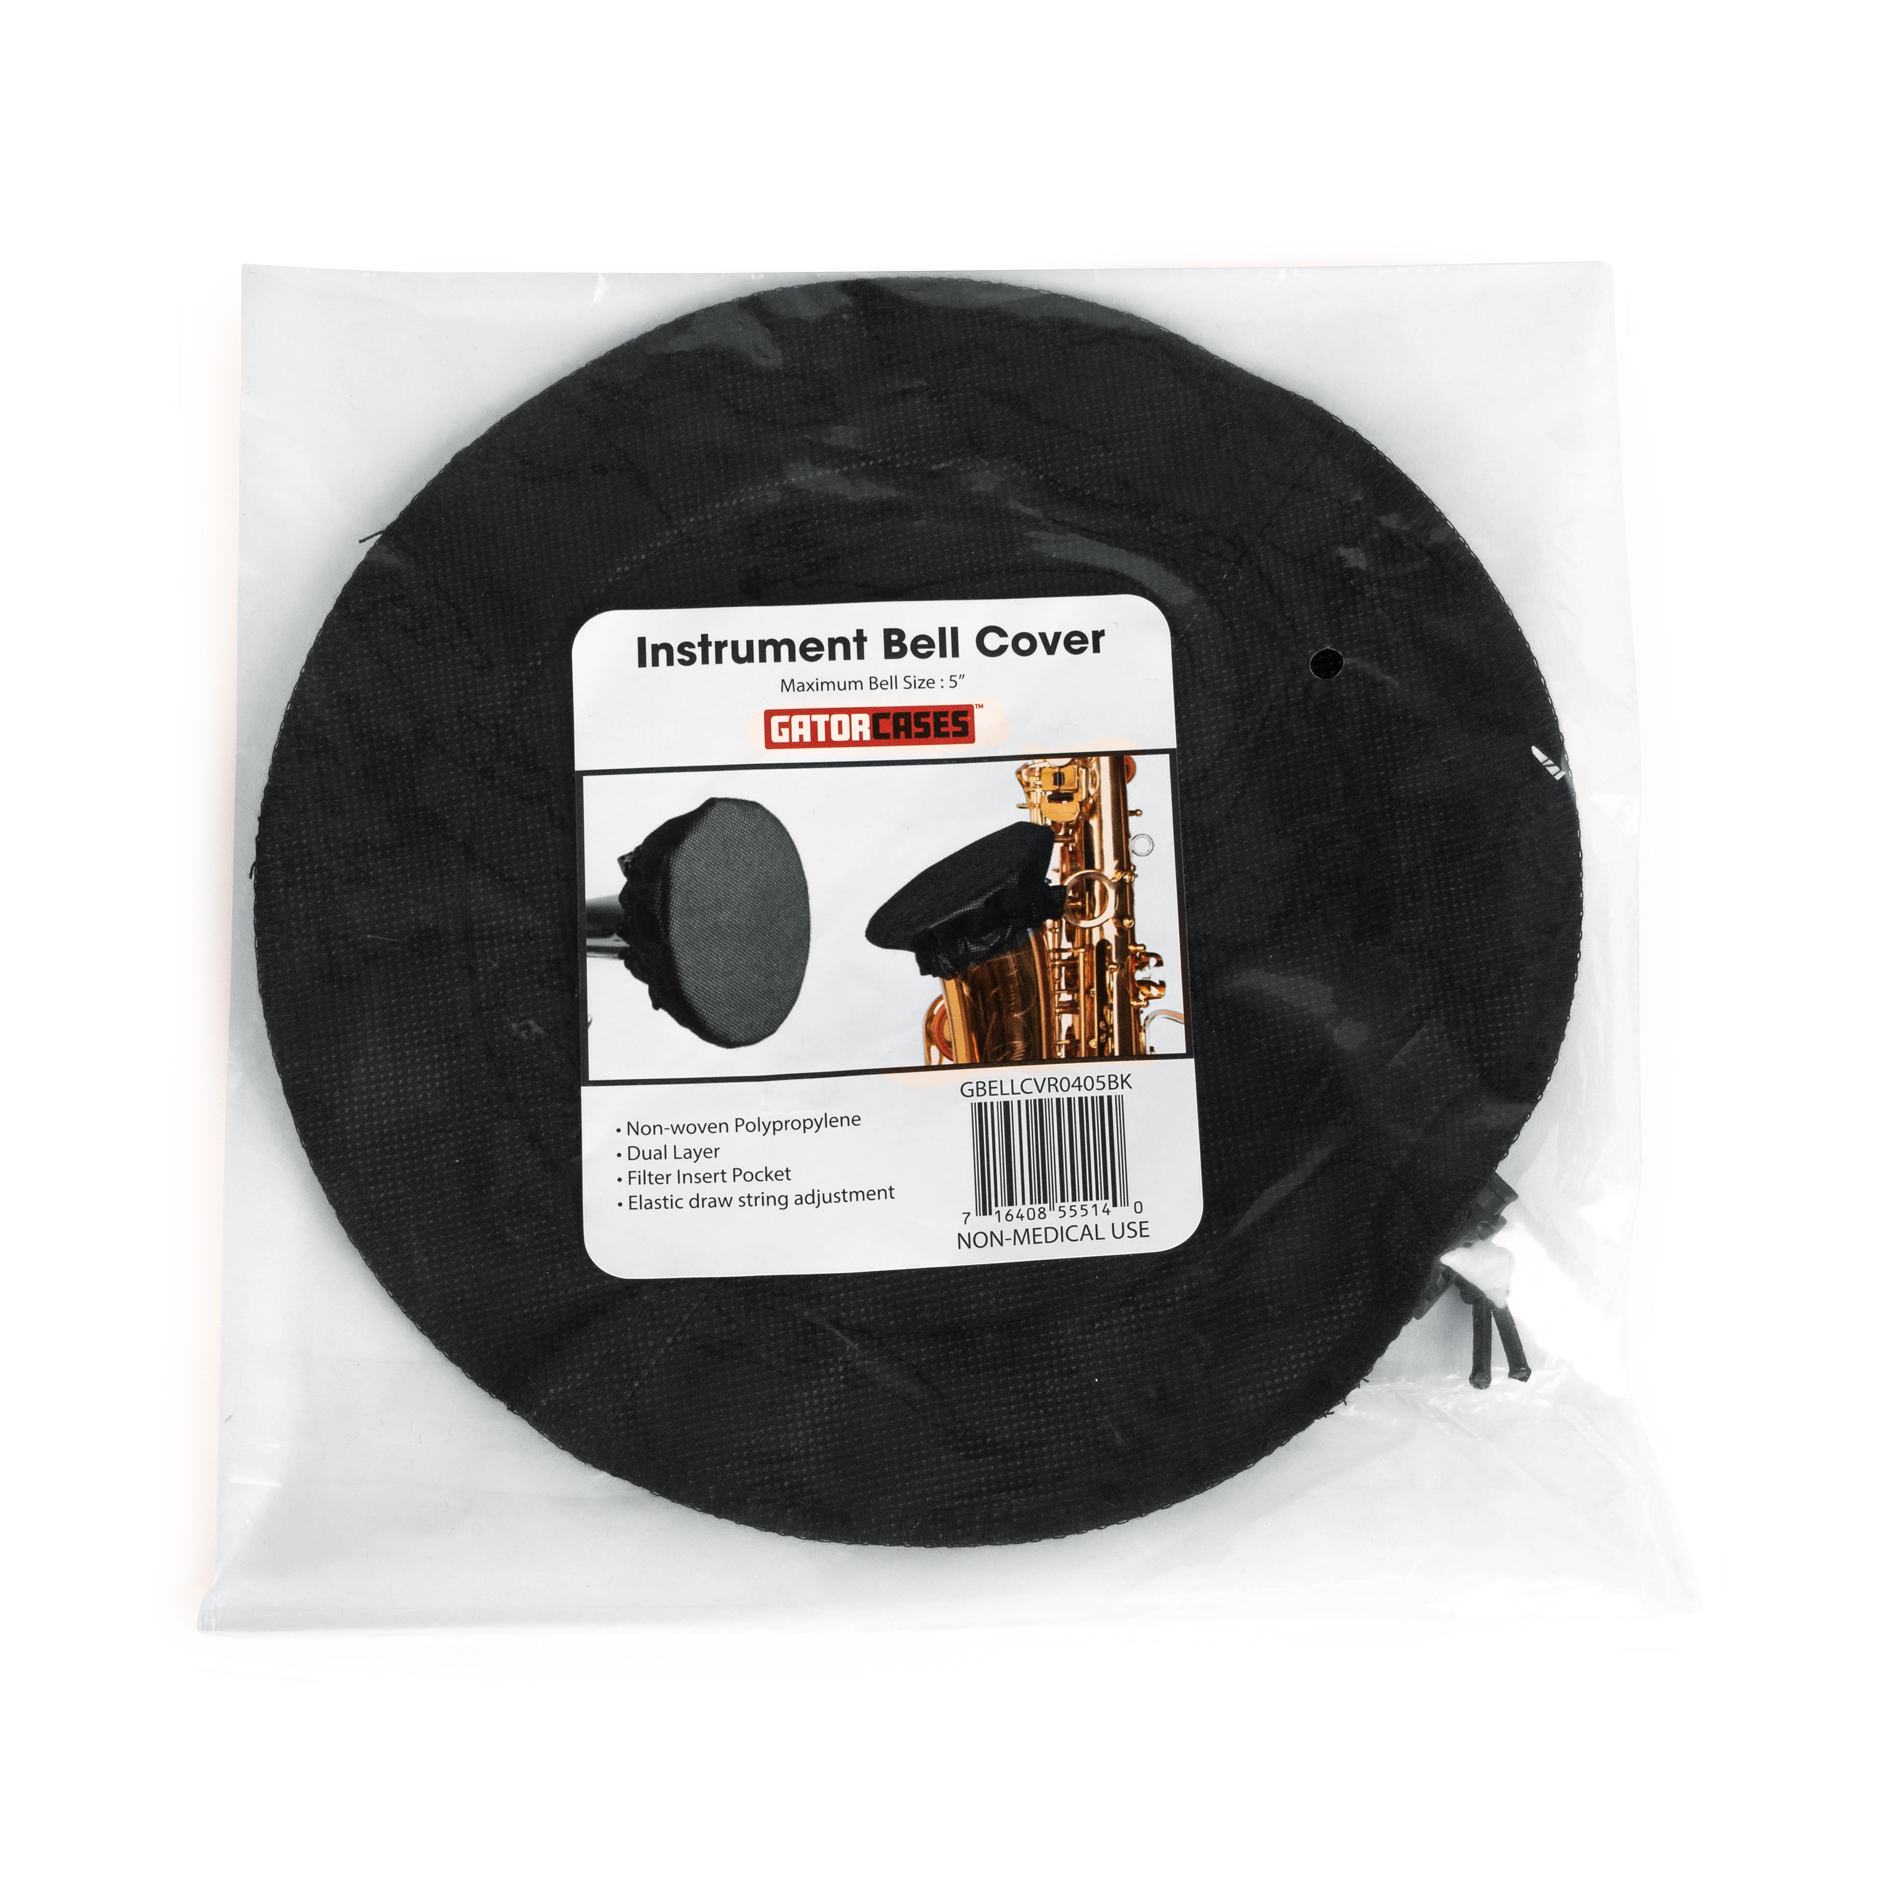 Black Bell Cover with MERV 13 Filter, 6-7 Inches-GBELLCVR0607BK